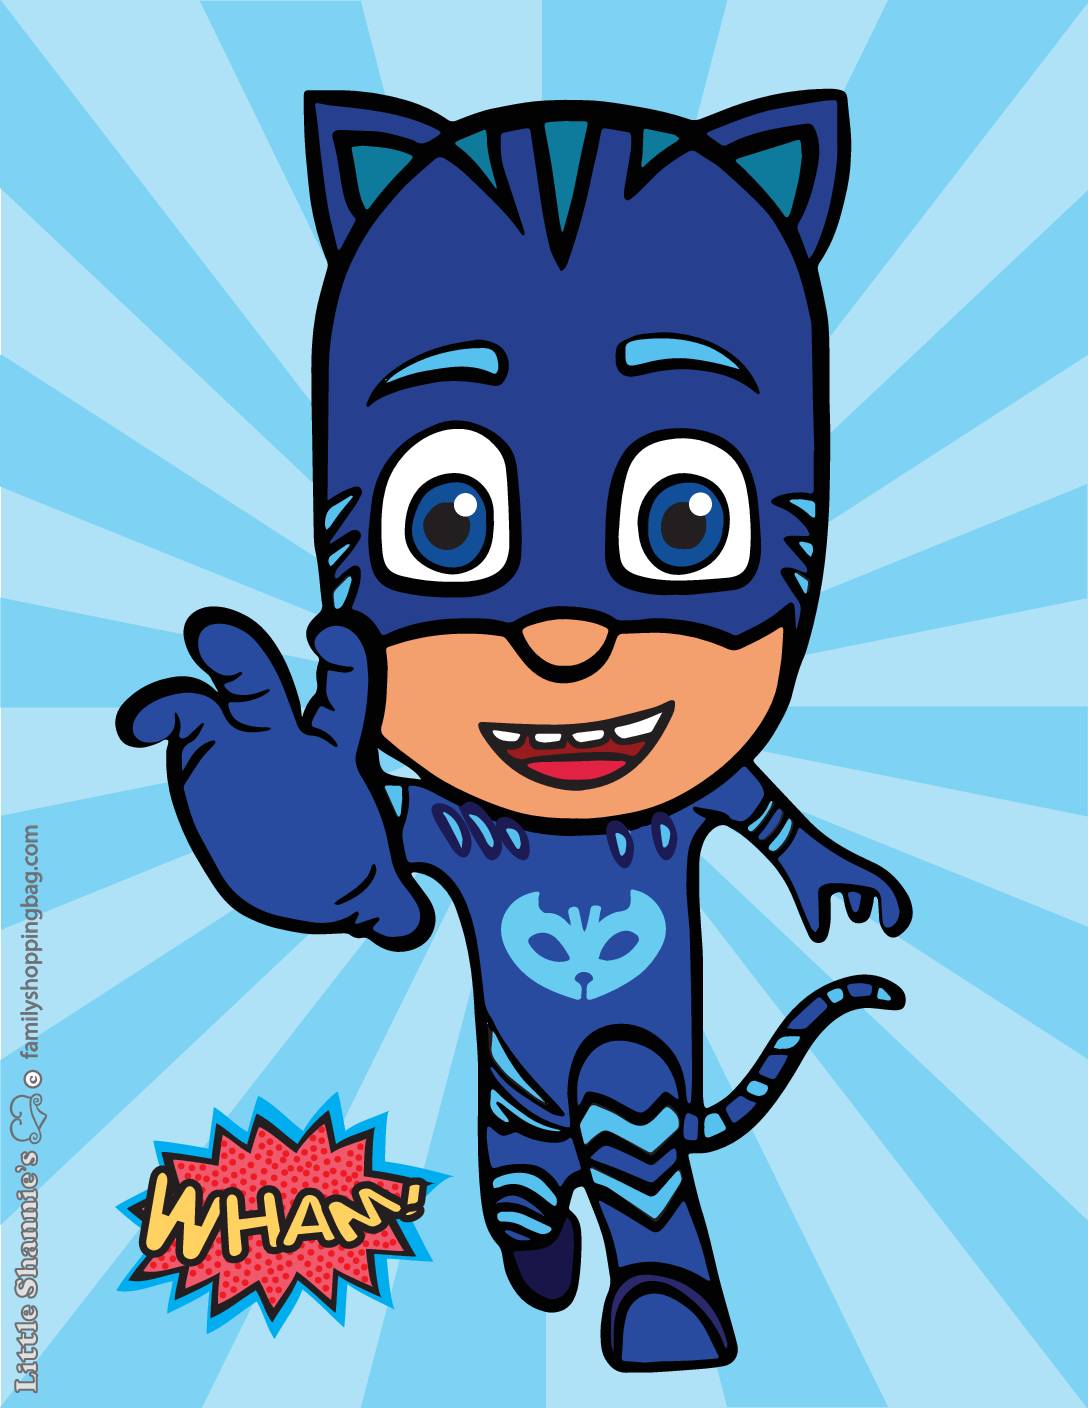 Wall Picture 2 PJ Masks Wall Pictures